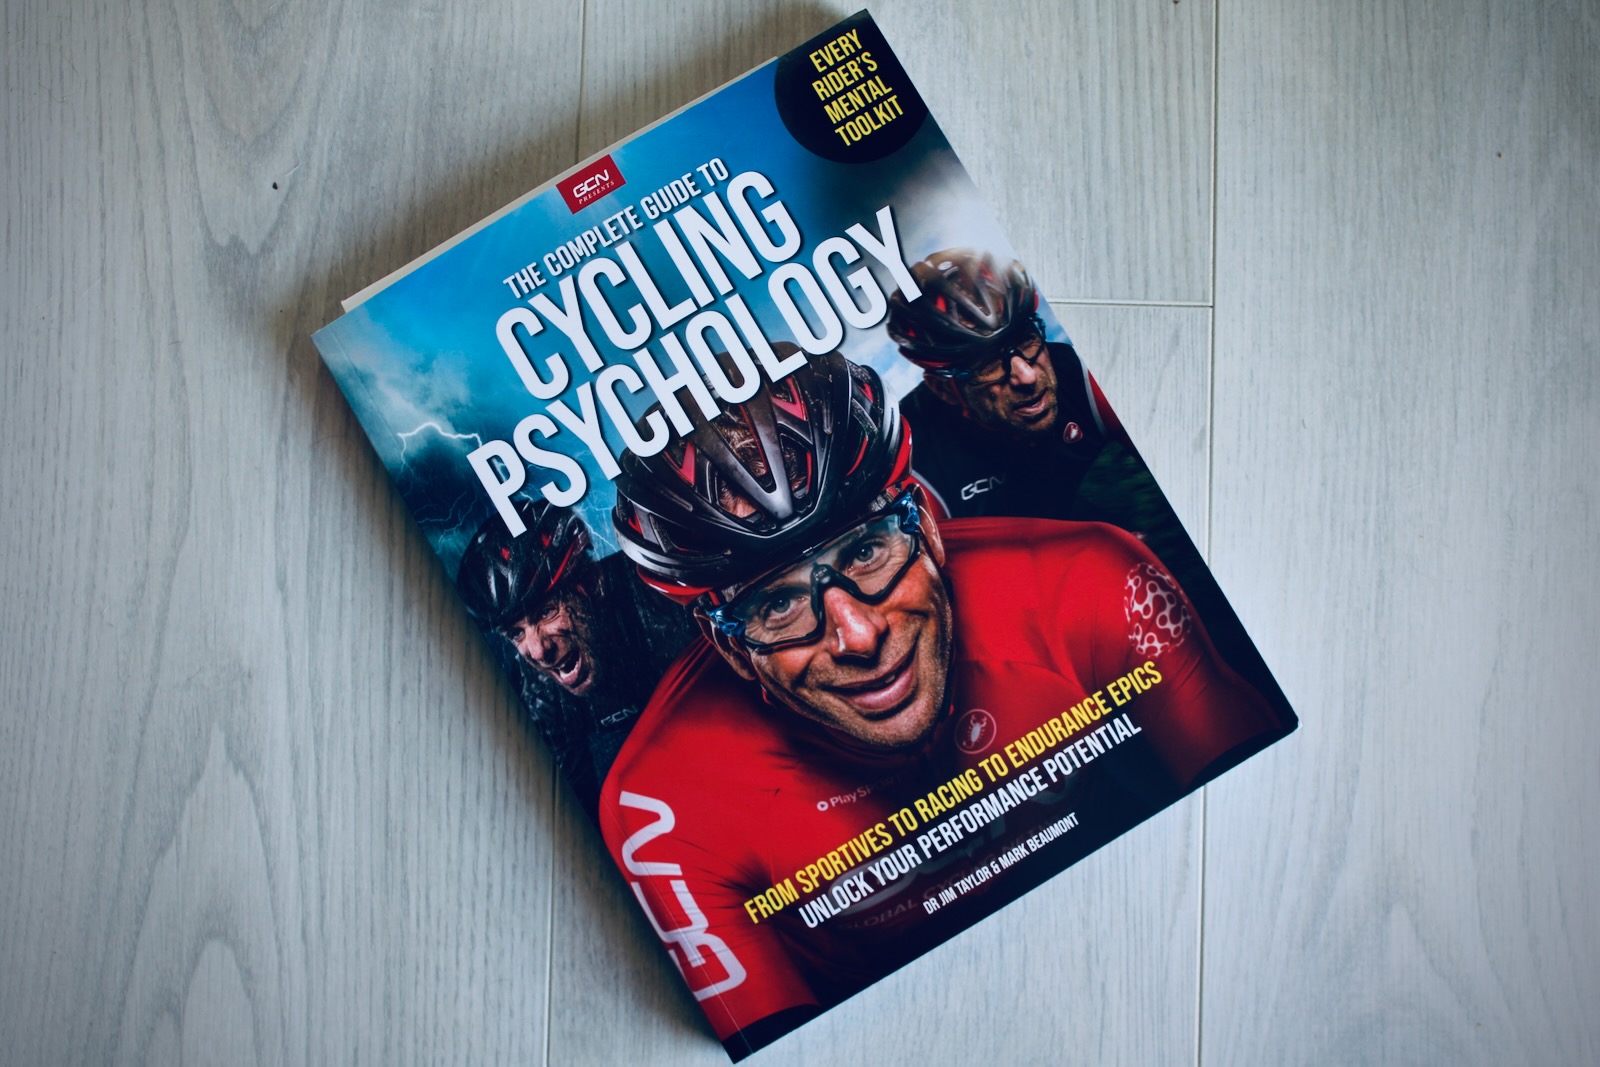 The Complete Guide to Cycling Psychology’ by Mark Beaumont and Dr Jim Taylor